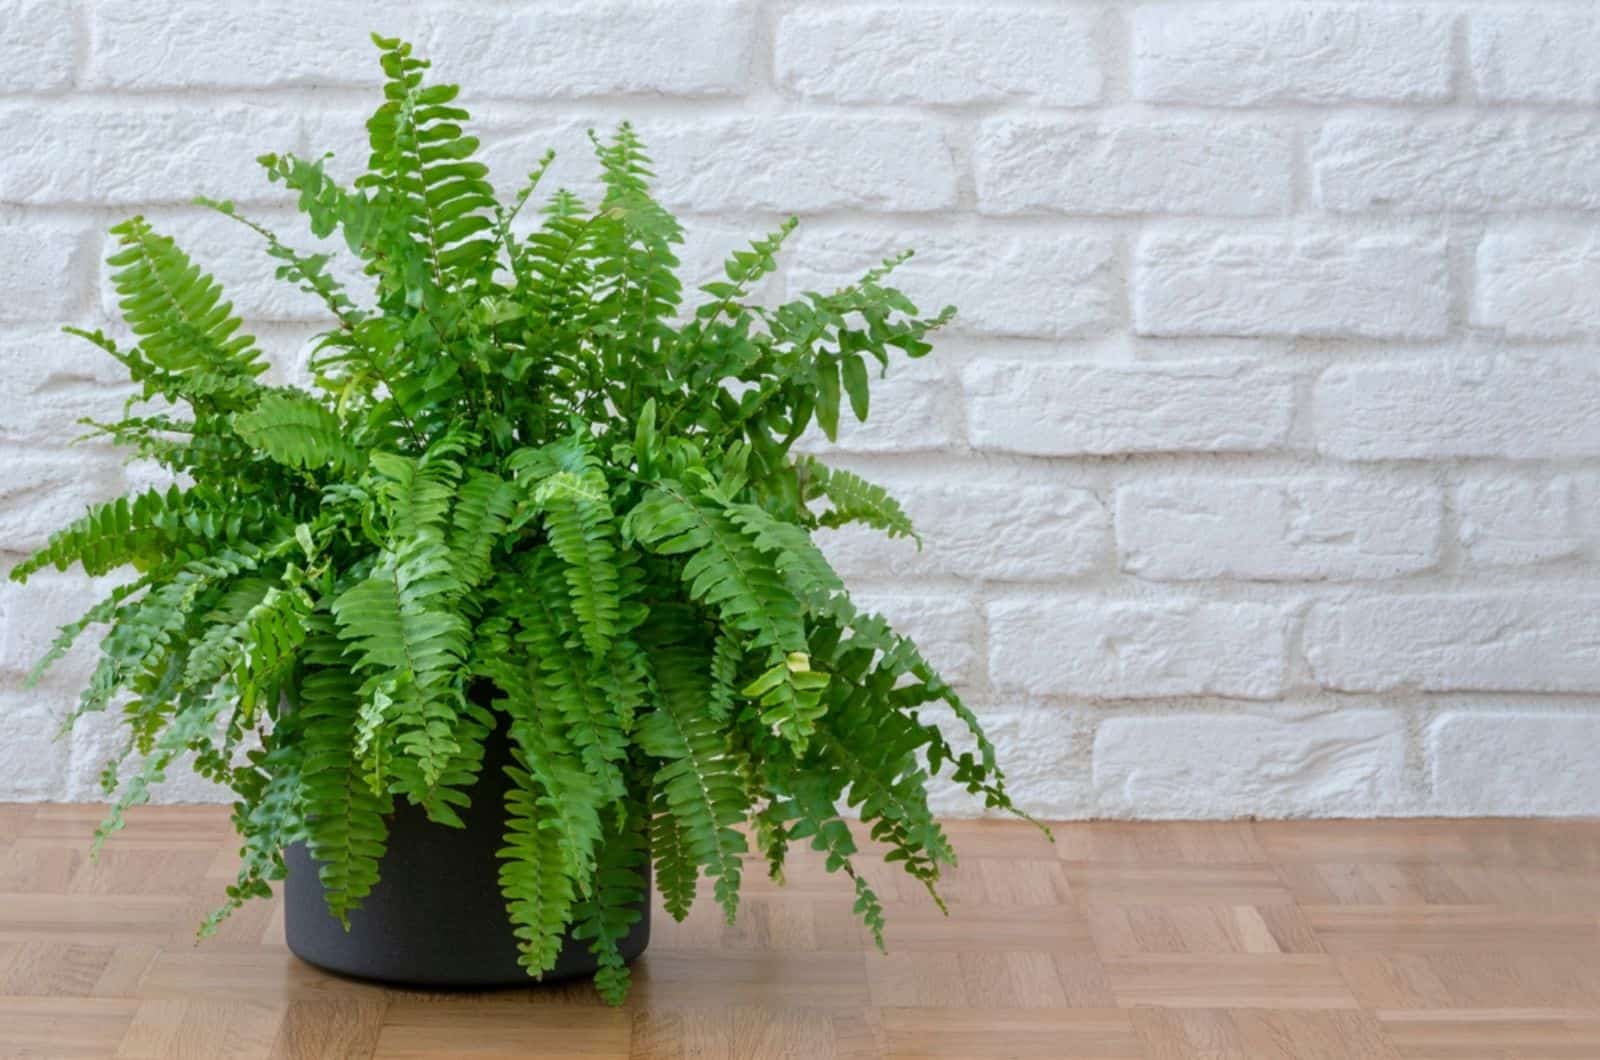 Fluffy Ruffle Fern Care: All Your Questions Answered